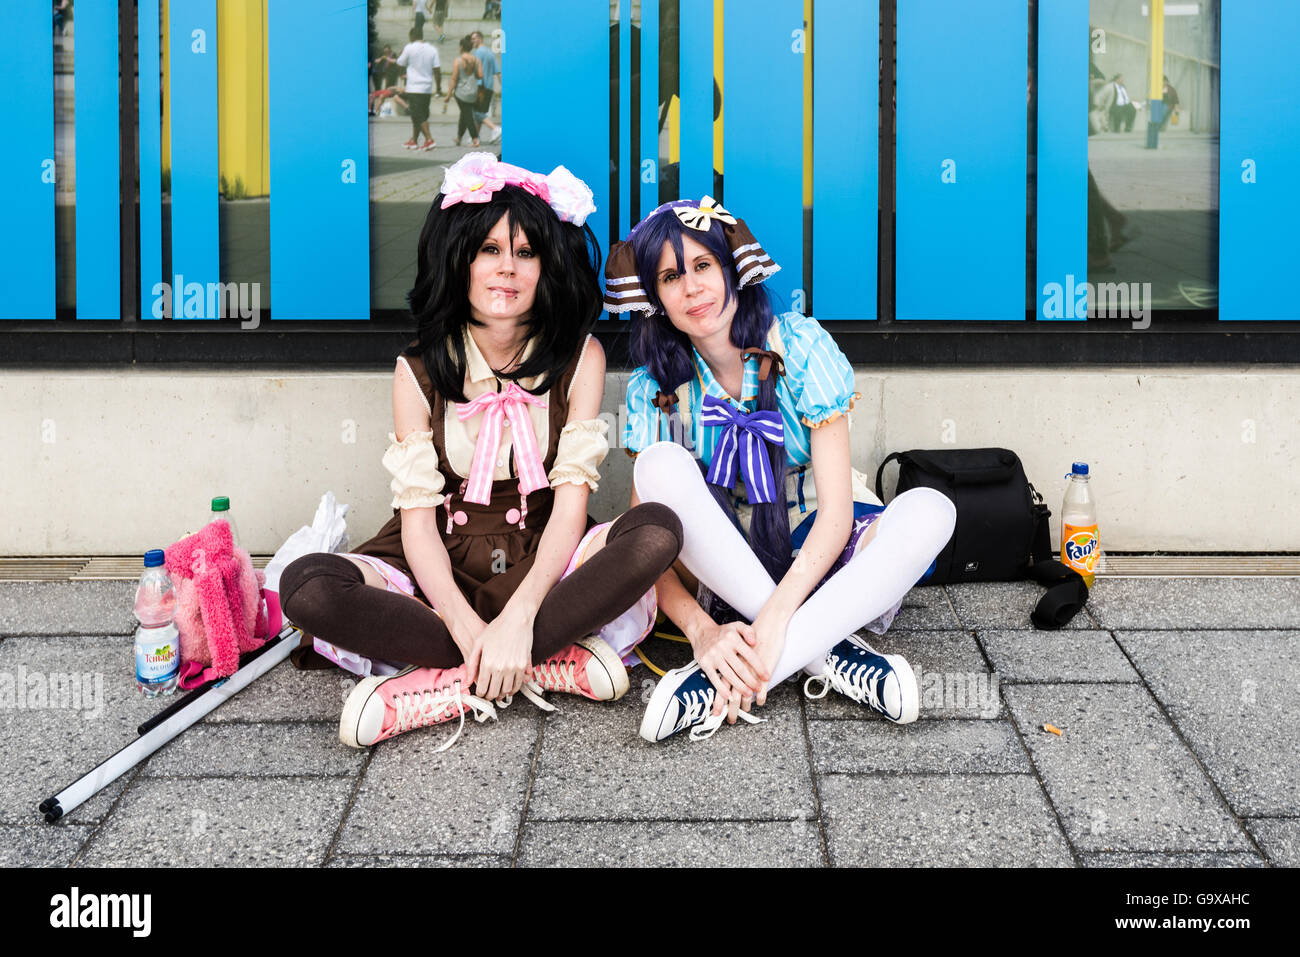 Stuttgart, Germany - June 25, 2016: Two female cosplayers are resting during the Comic Con Germany event in Stuttgart in front o Stock Photo